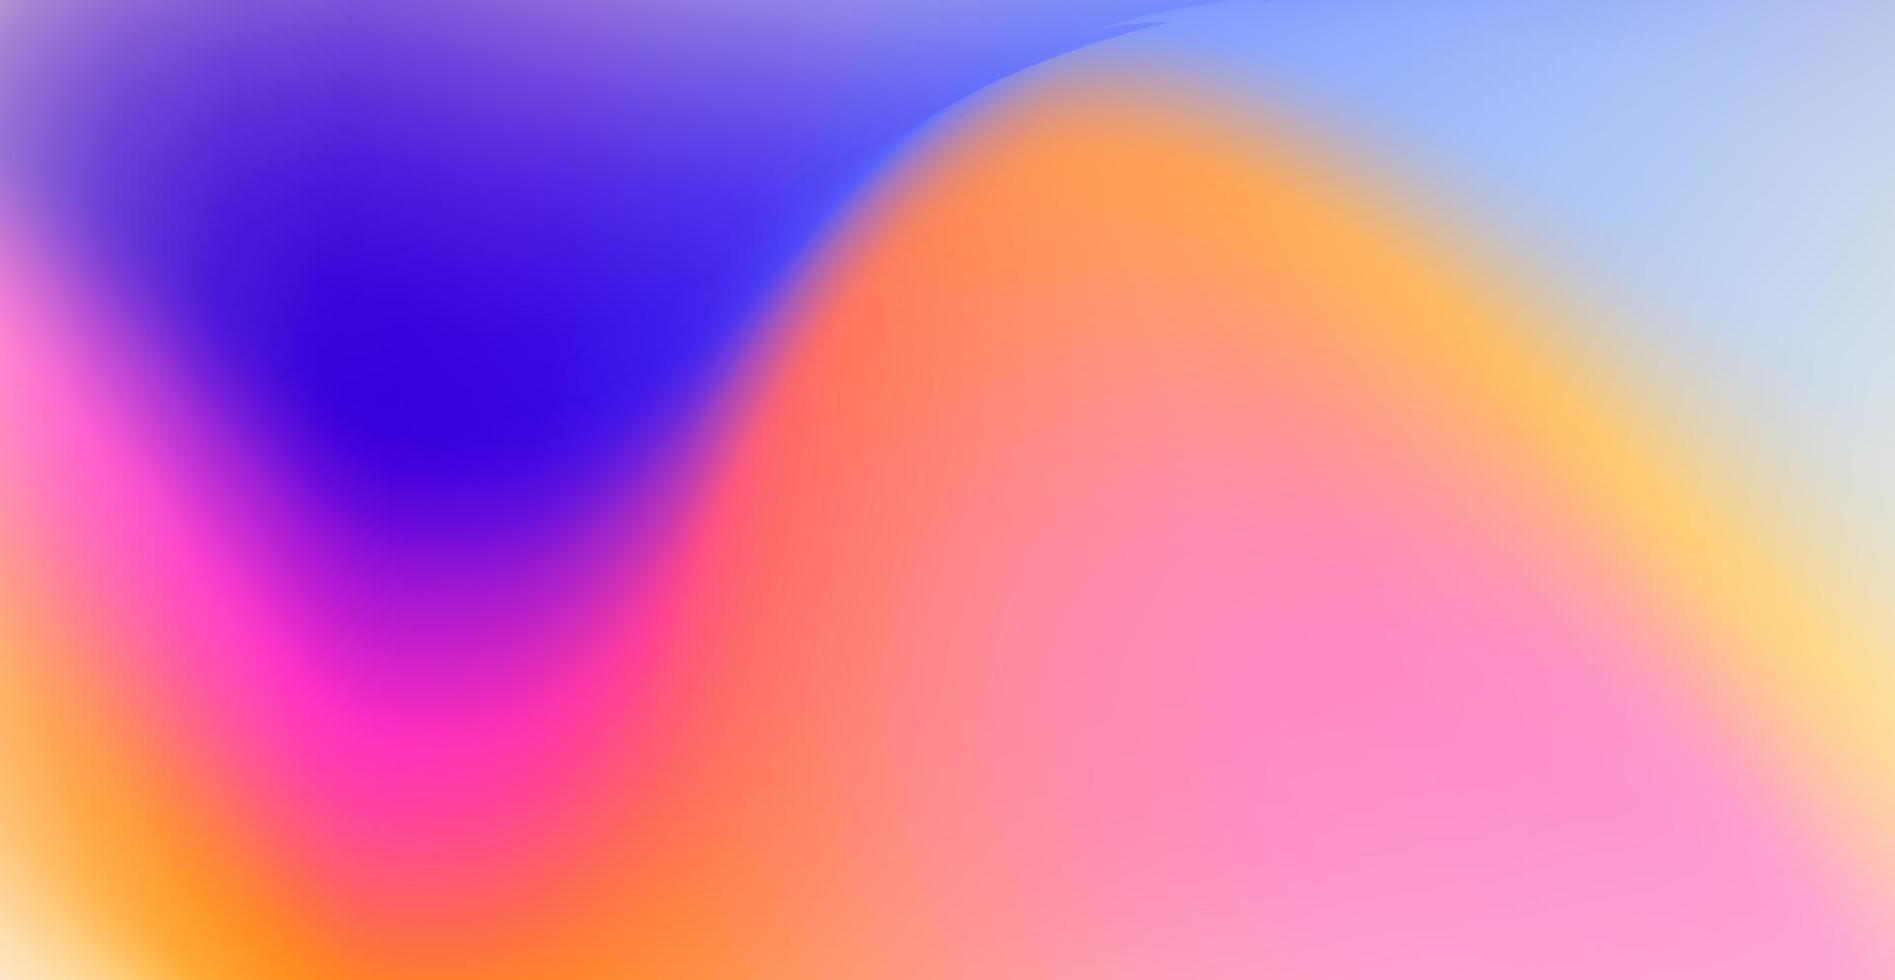 abstract blurry fluid vector background of polar lights. Holographic shiny colors, orange, pink, and blue. eps10 vector